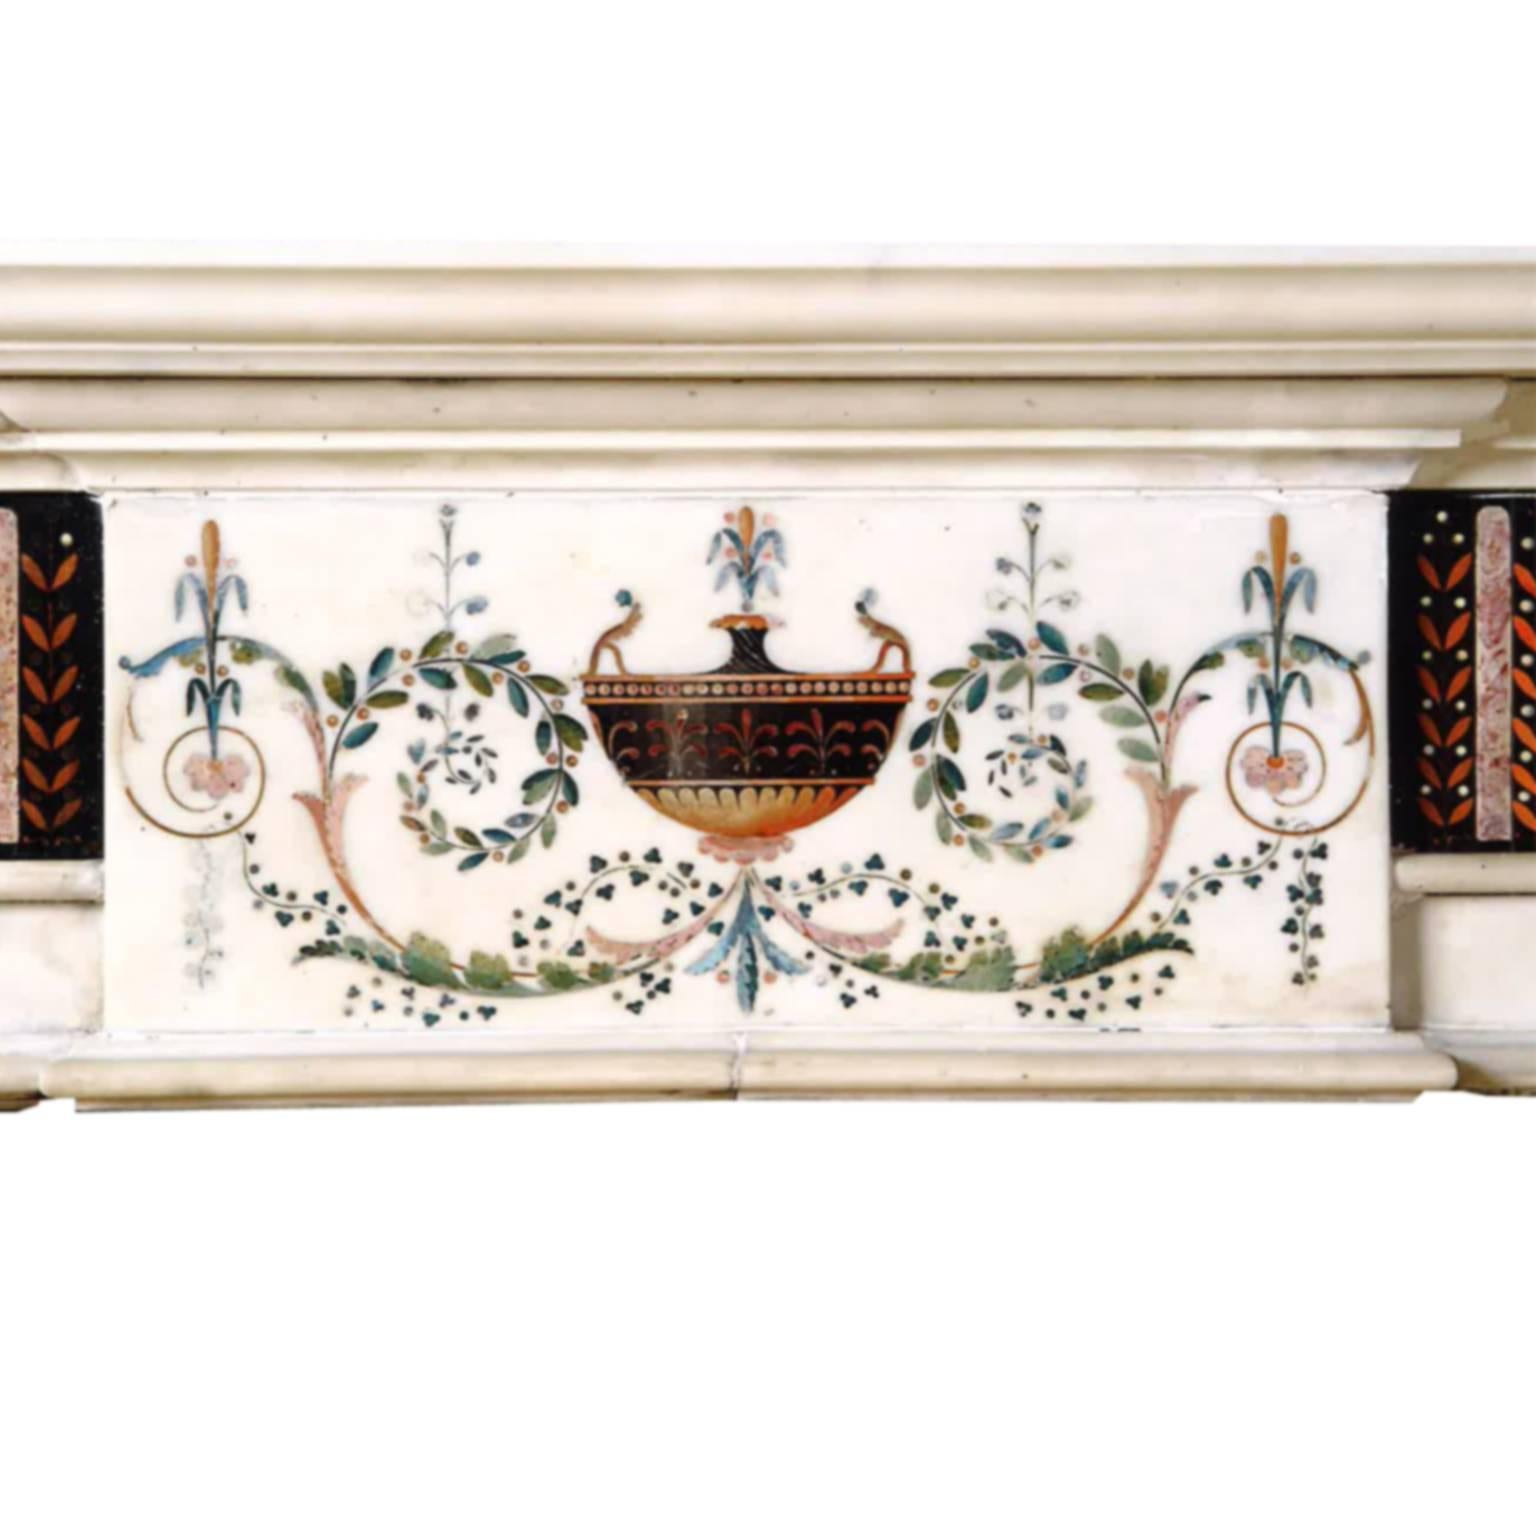 This white hand-carved marble chimney-piece with Scagliola inlay and break fronted shelf attributed to Pietro Bossi who is known to have worked in Dublin from 1785-1798.

Not much is known about Pietro Bossi, although much inlay work of the late